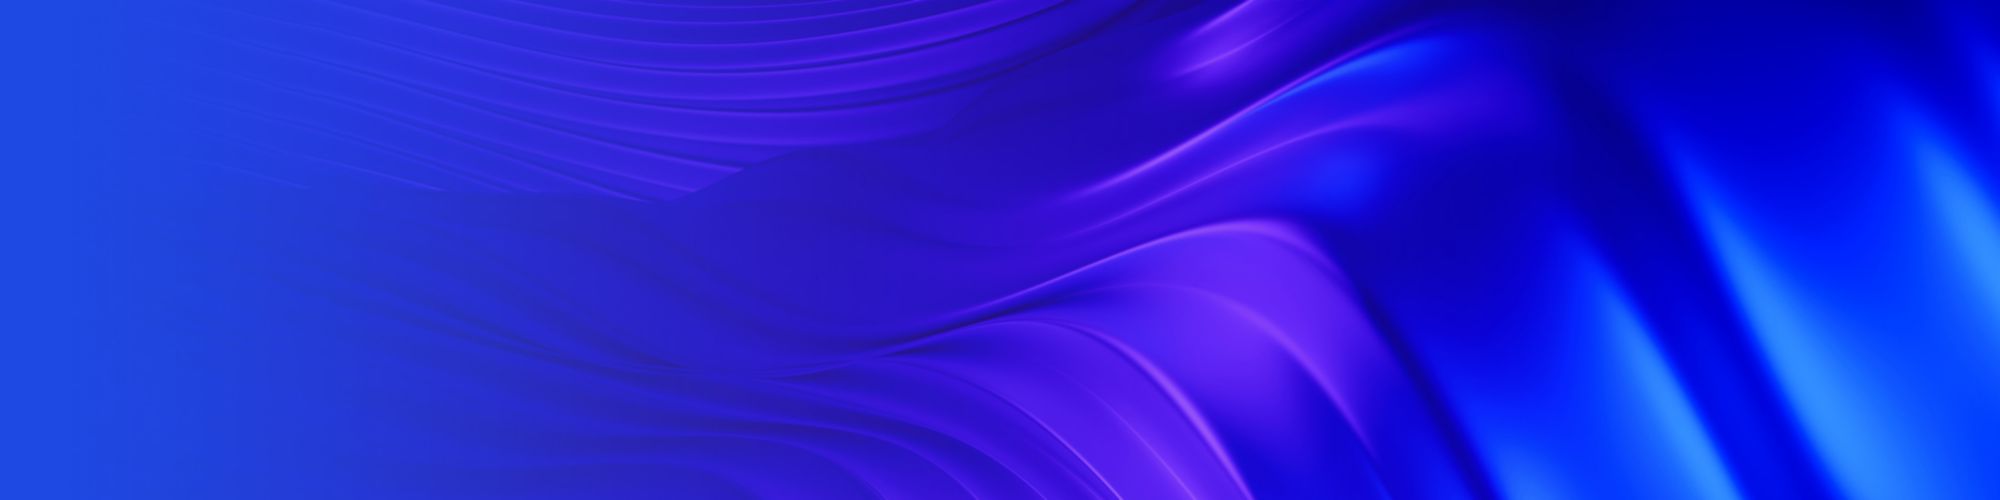 abstract-blue-banner